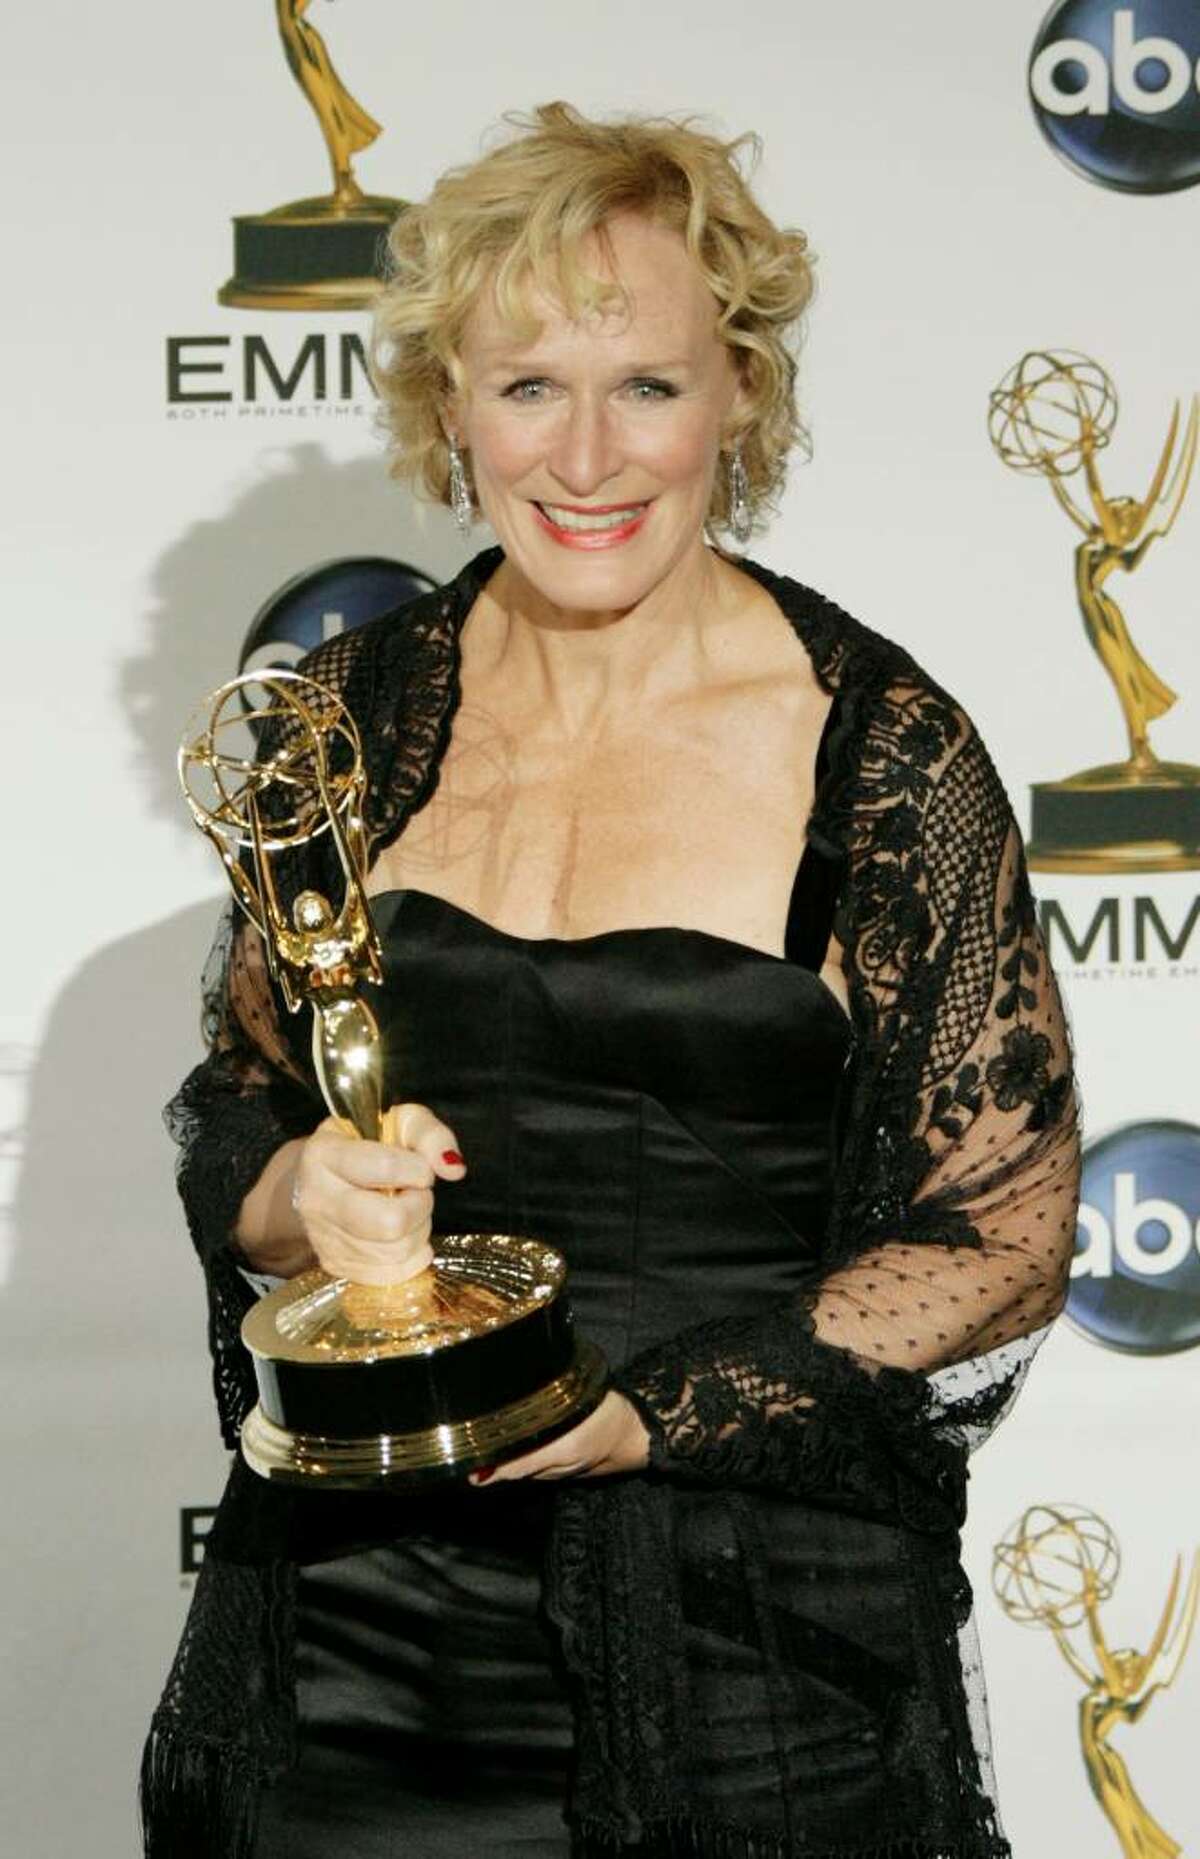 Actress Glenn Close is once again nominated for outstanding actress in a drama series for her role in "Damages," an award she won at last year's Emmy Awards.